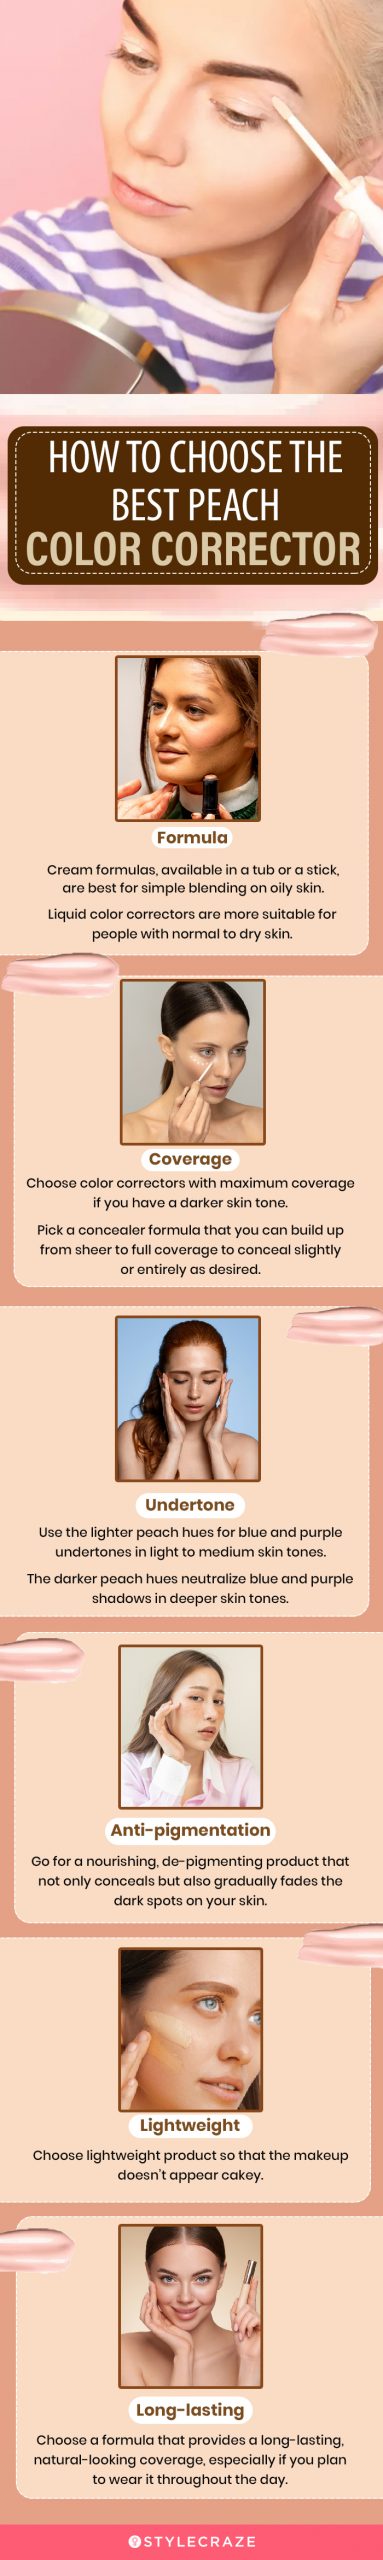 How To Choose The Best Peach Color Corrector